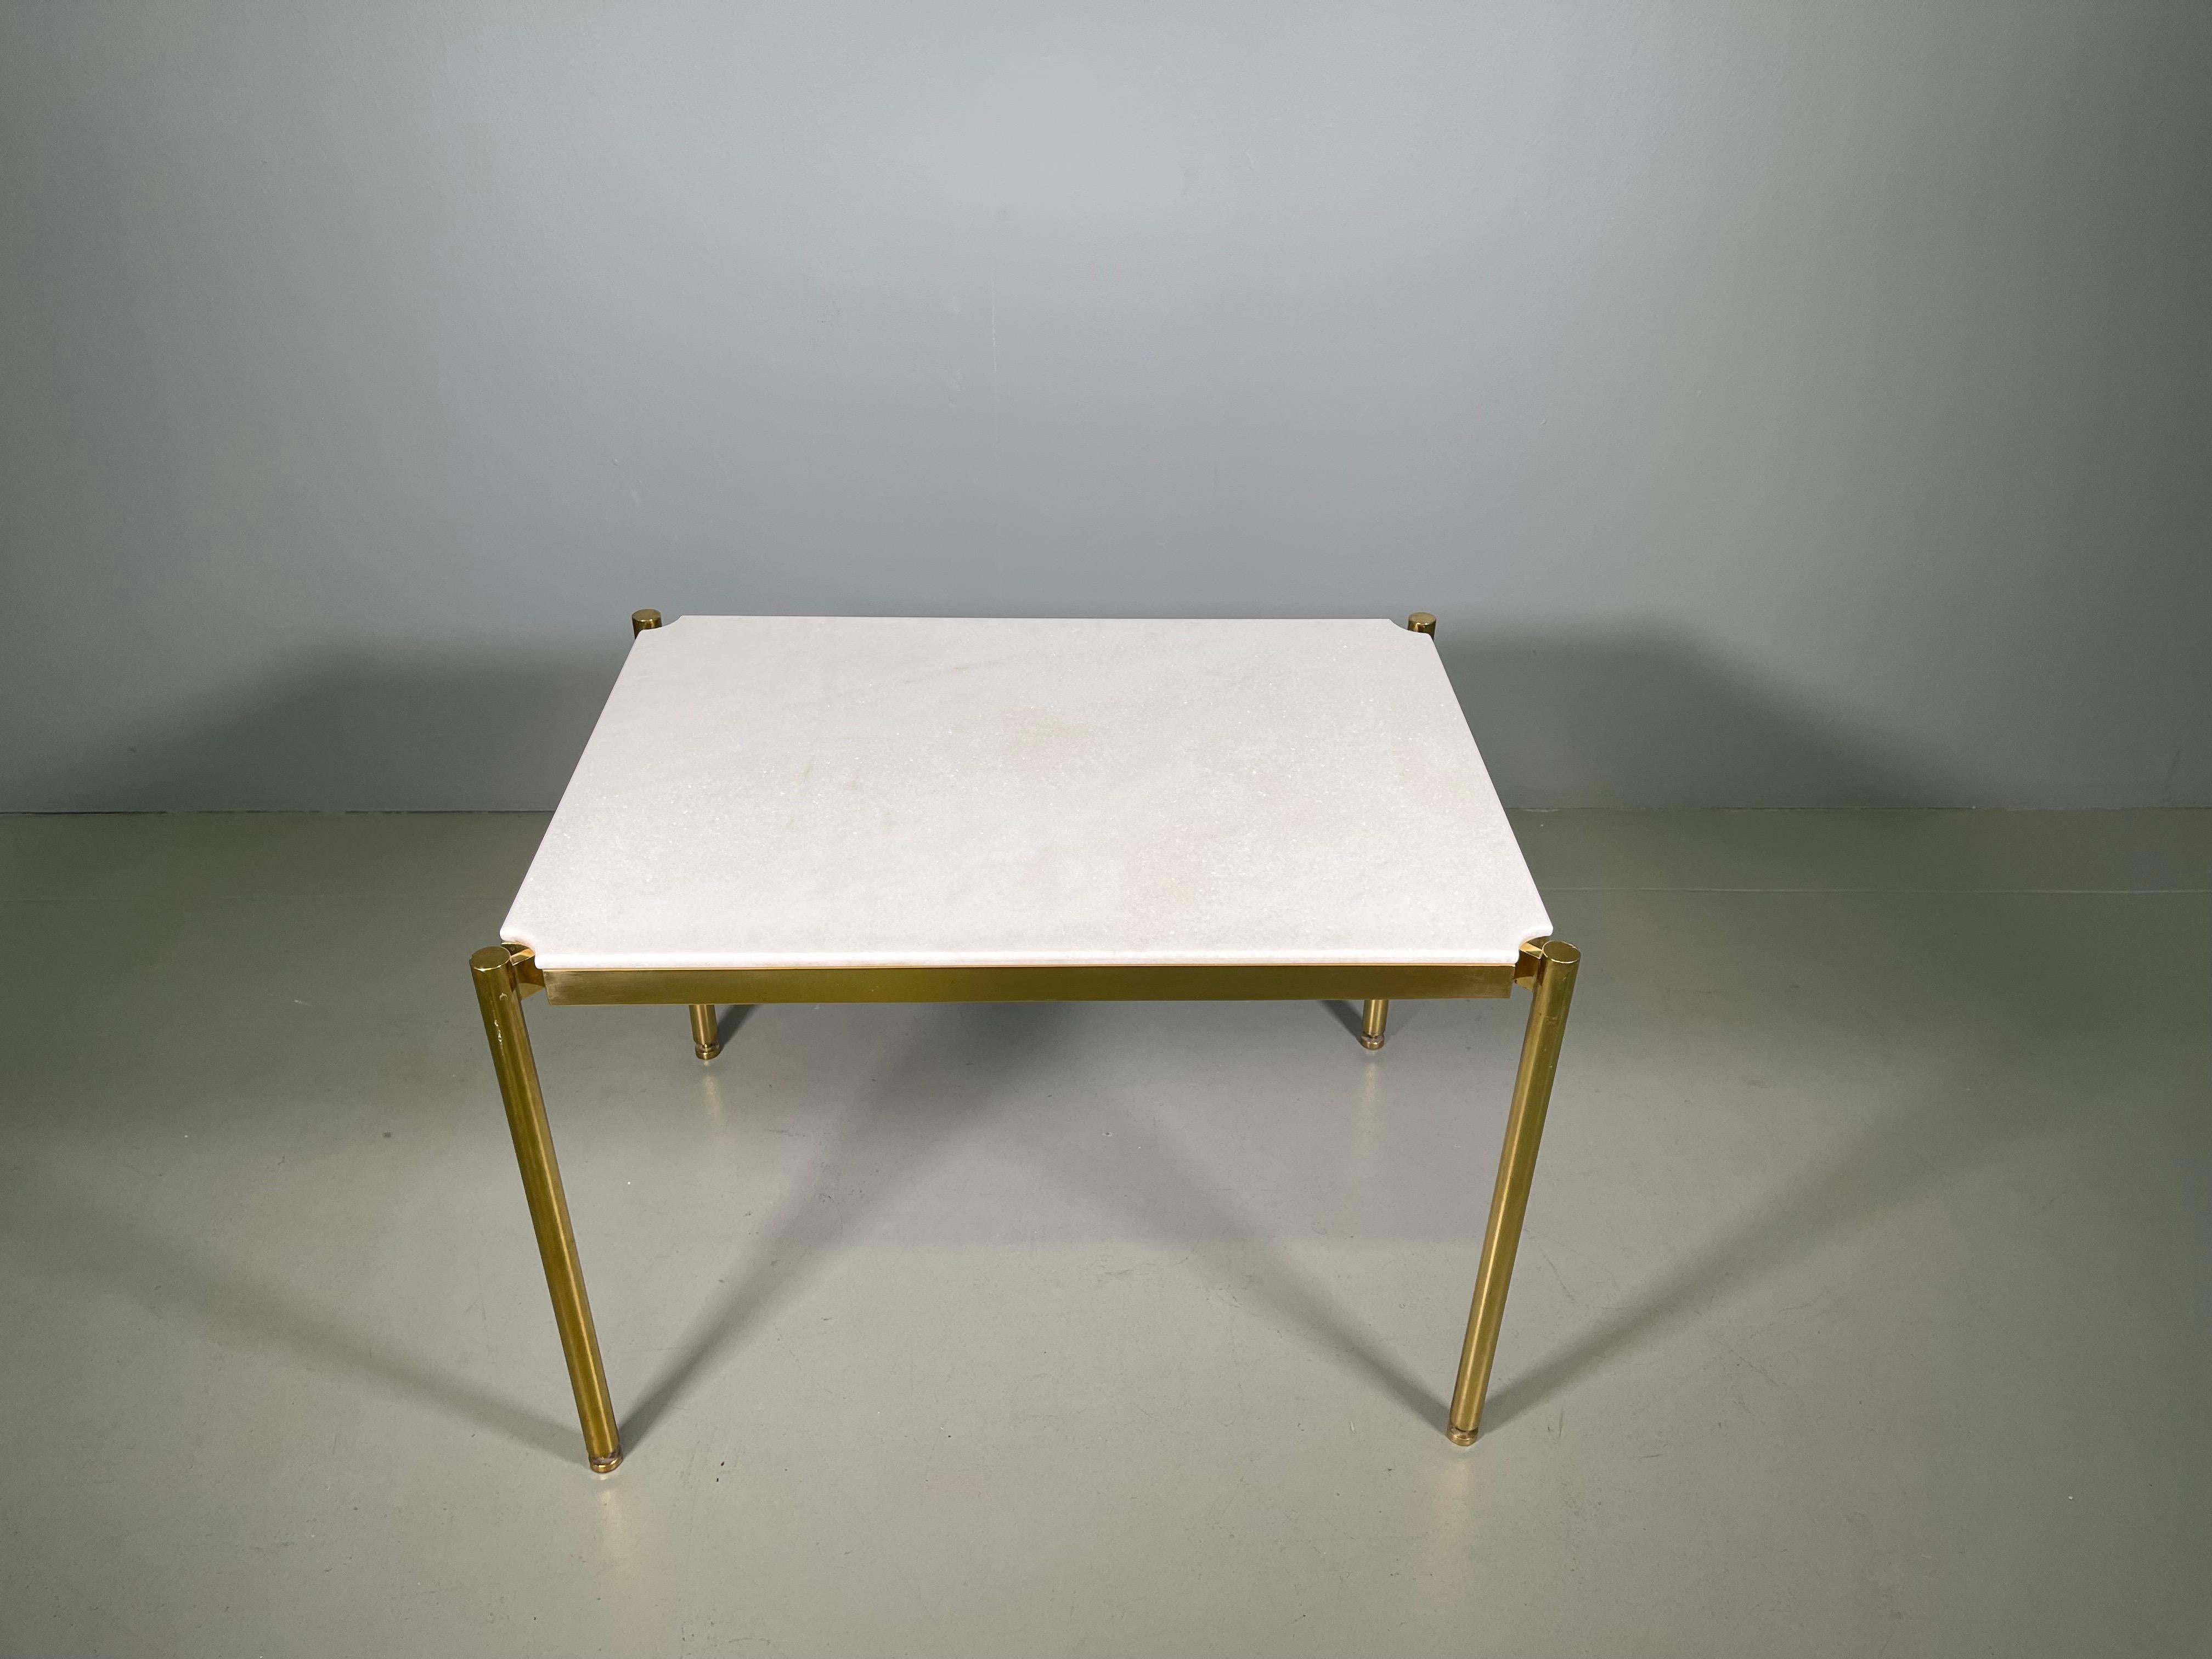 Italian 20th Century Osvaldo Borsani Low Table in Brass and Rare Sivec Marble for Tecno For Sale